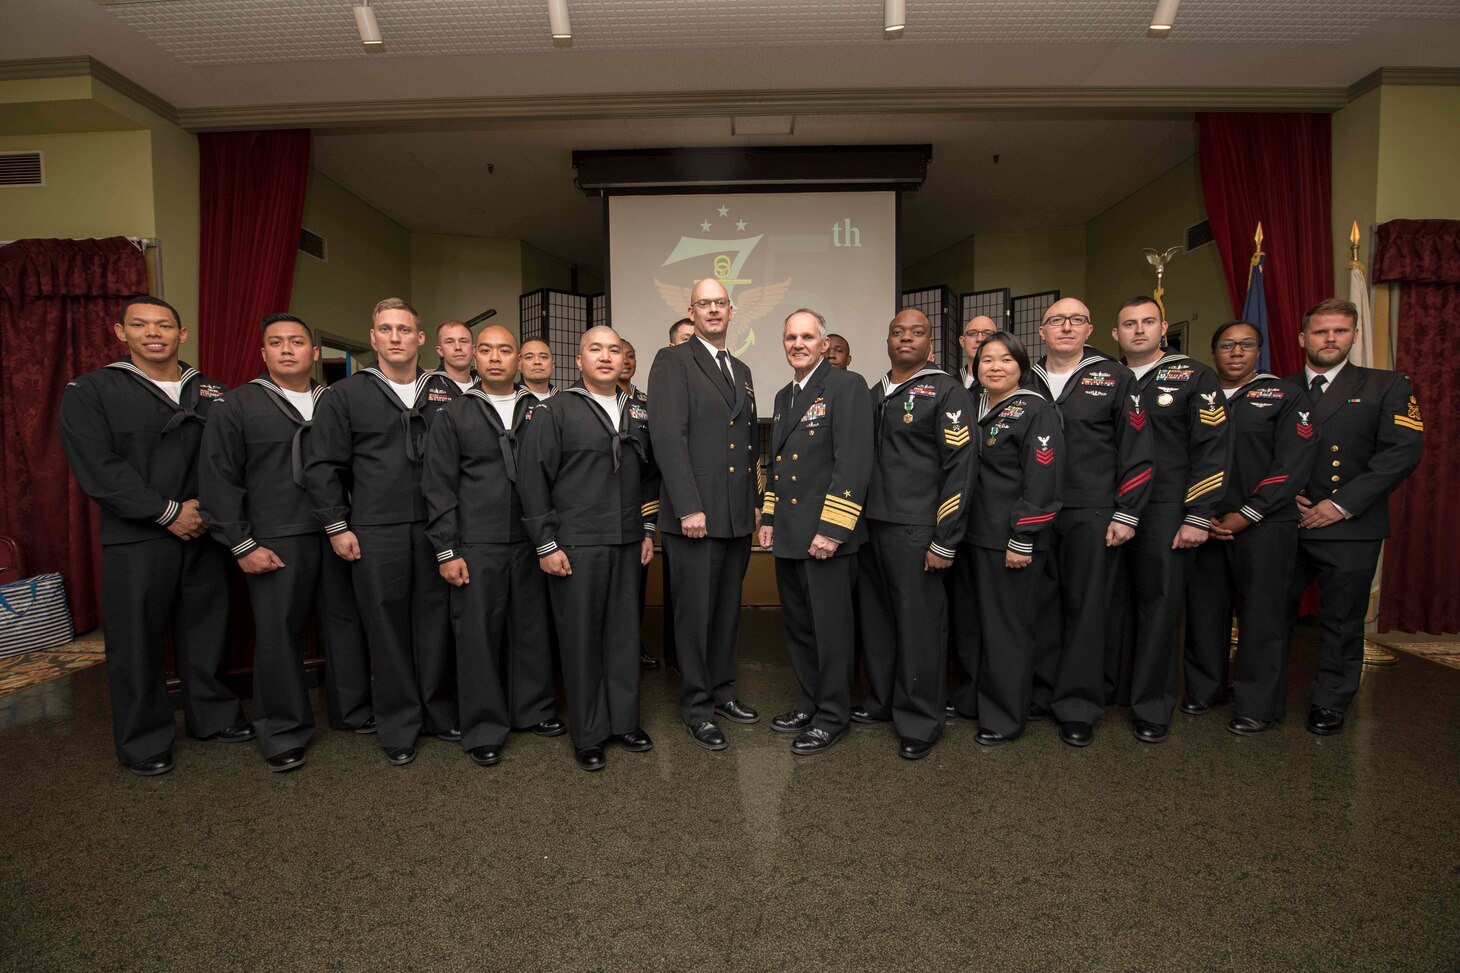 YOKOSUKA, Japan (Jan, 17 2019) - Vice Adm. Phil Sawyer(center right), along with Fleet Master Chief Tobi Howat(center left), pose with Sailors of the Year from the U.S. Navy's 7th Fleet and Royal New Zealand Navy at the announcement luncheon during 7th Fleet Sailor of the Year competition. The 7th Fleet Sailor of the Year Week is designed to share with these outstanding Sailors the unique operational environment in the 7th Fleet as well as enhance regional partnerships with like-minded forces.